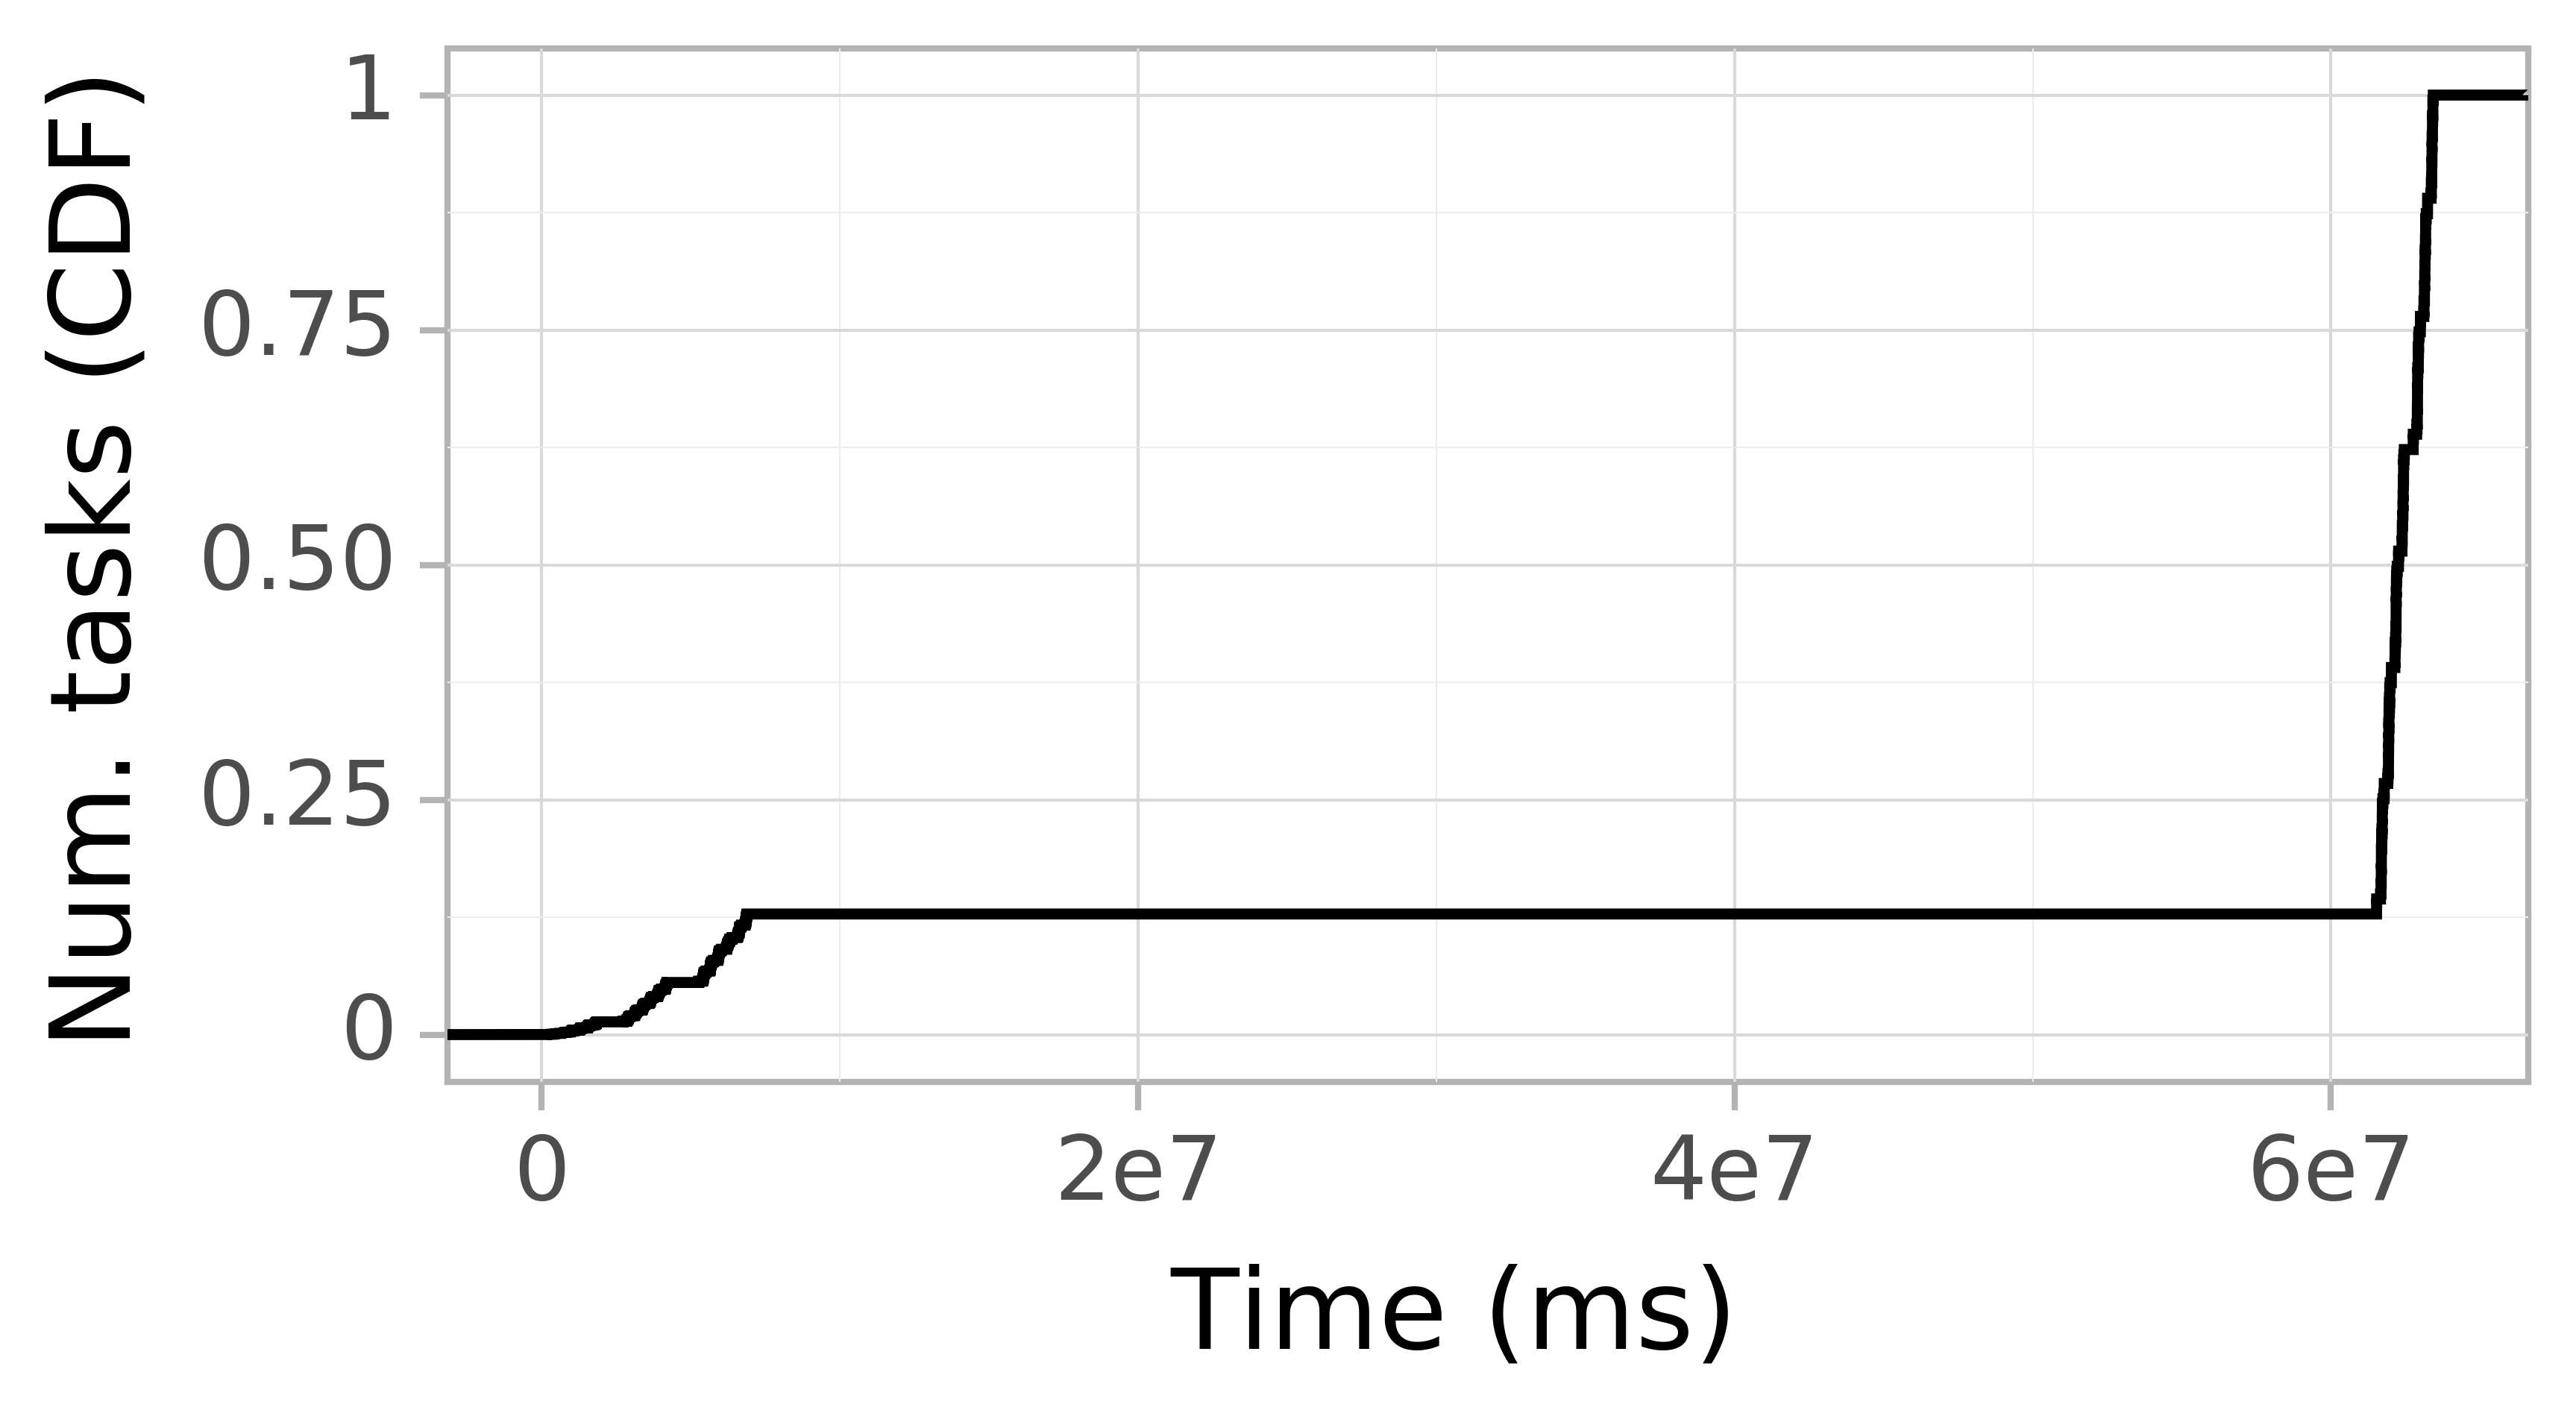 Task arrival CDF graph for the askalon-new_ee35 trace.